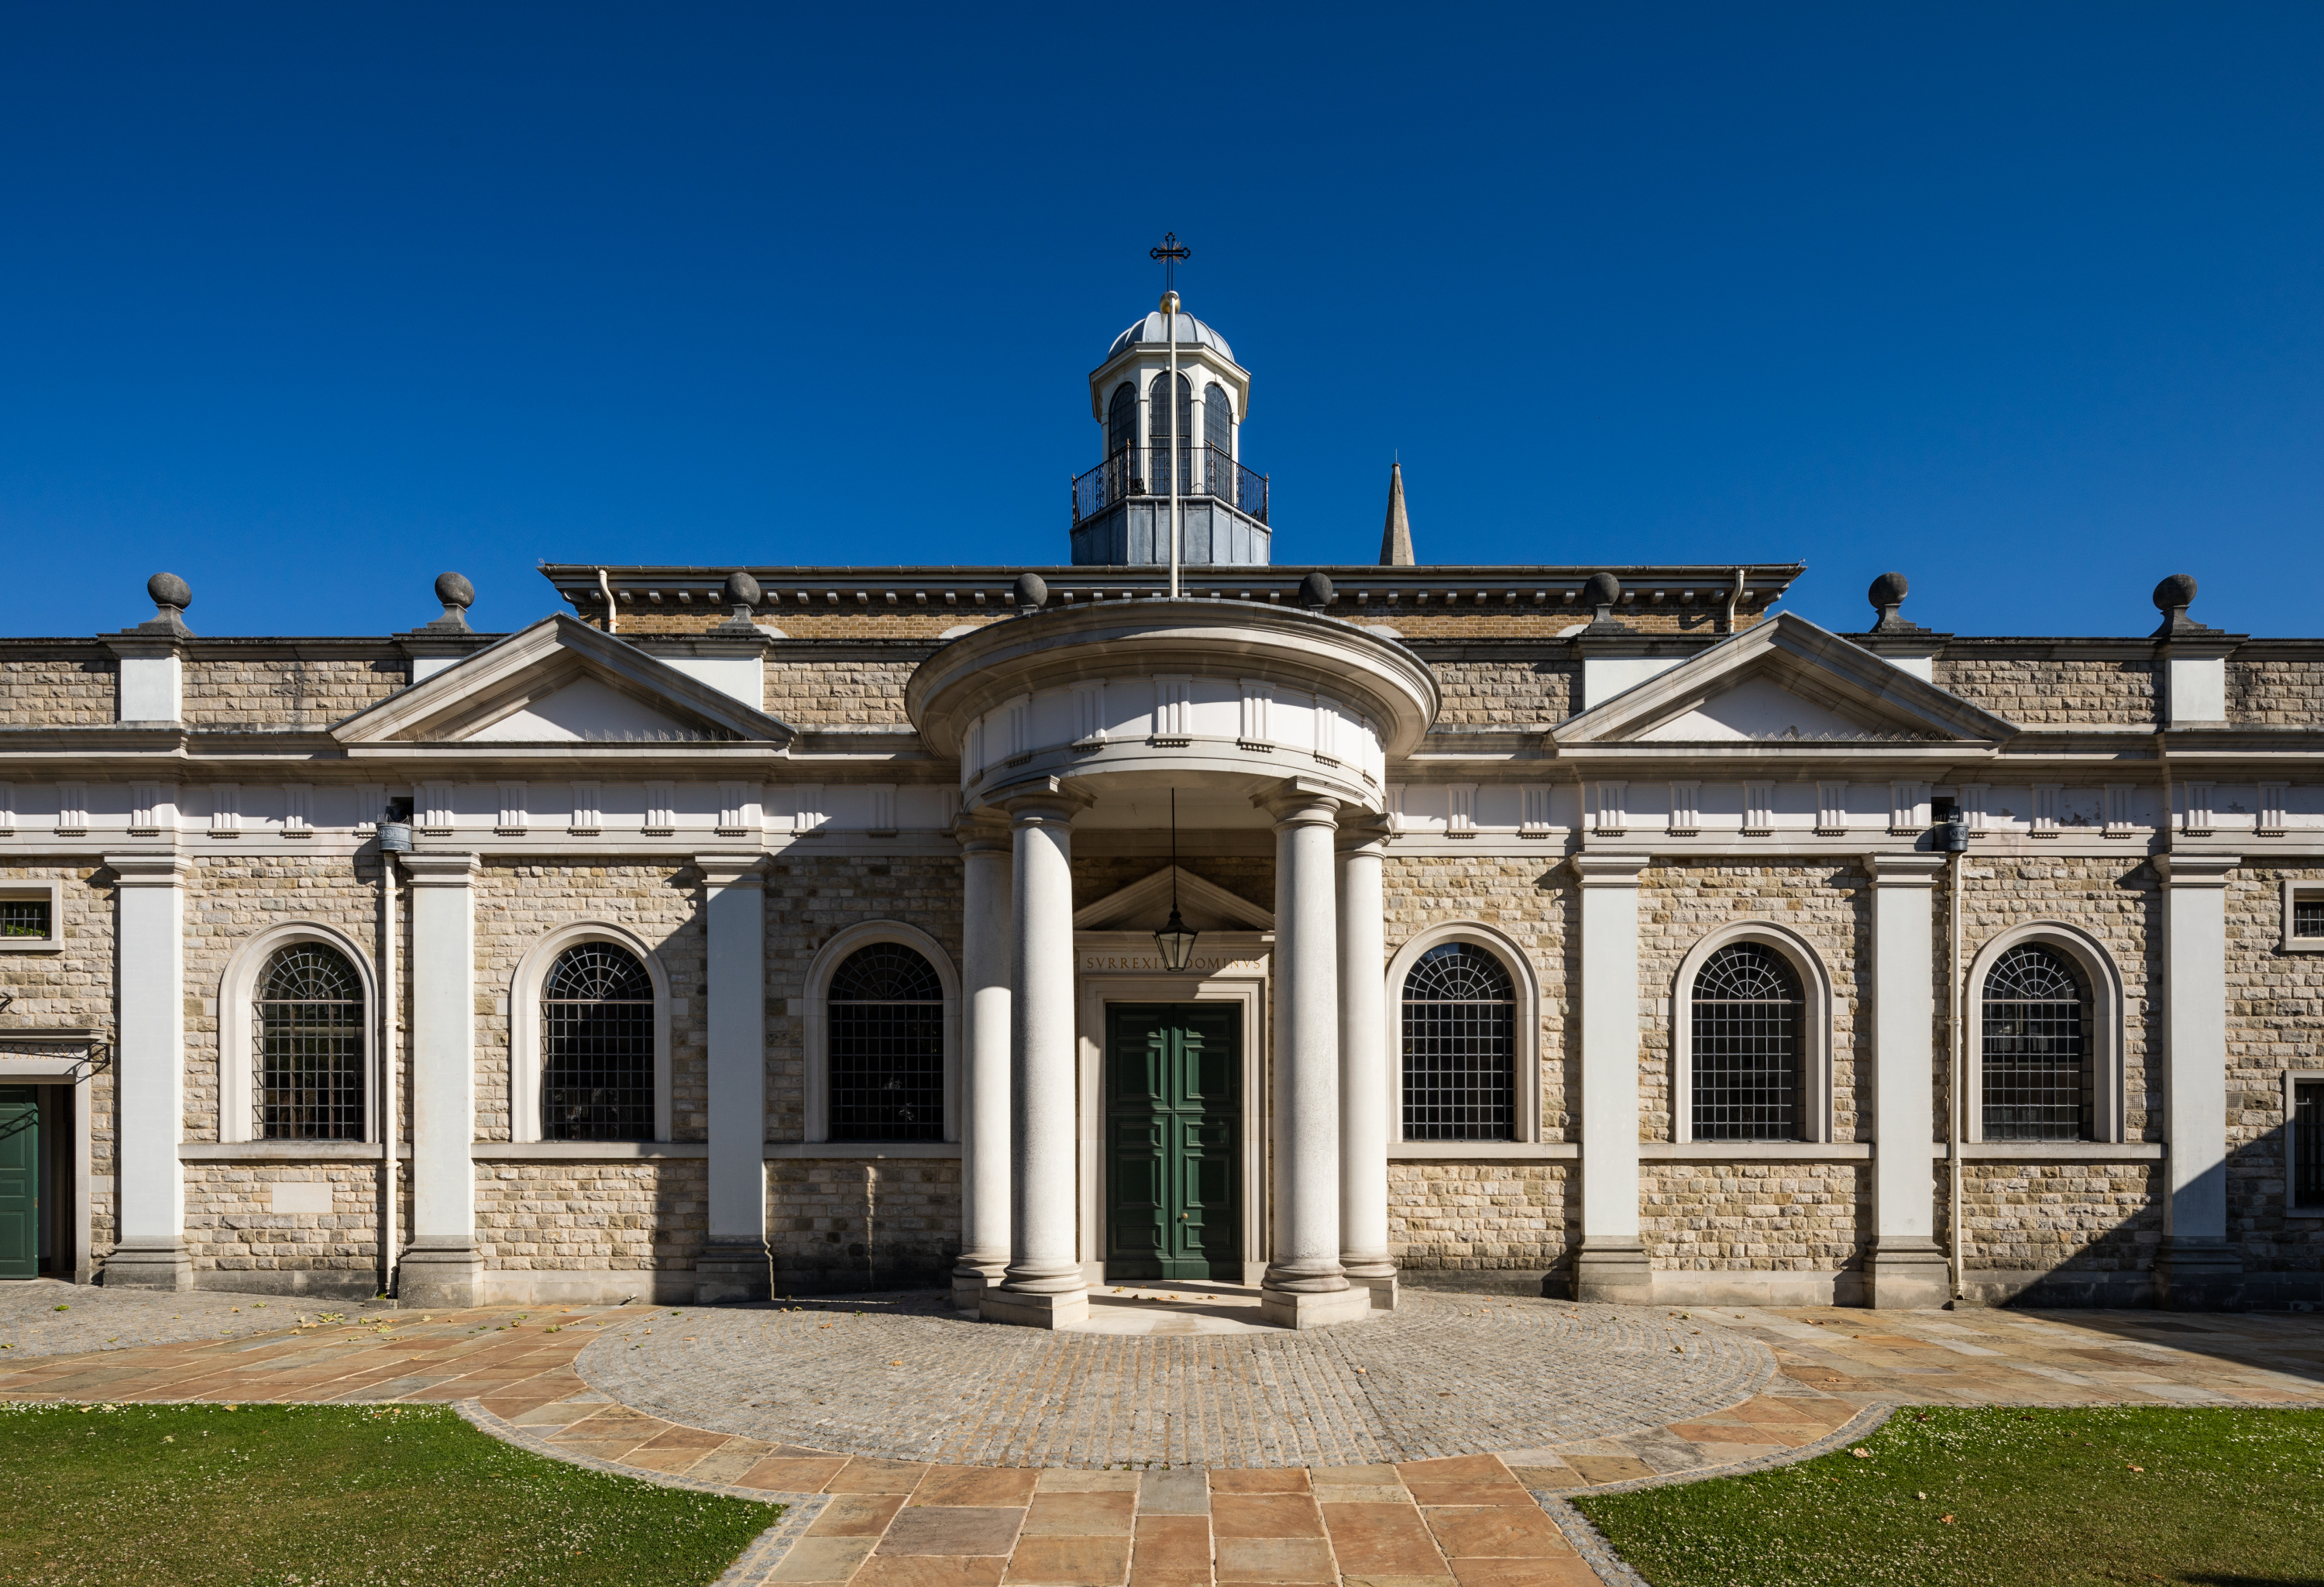 The exterior of Brentwood Cathedral shows a cobbled and paved circular external flooring. A rounded porch with pillars and a long line exterior wall with semi-circular leaded windows and two arches, with a decorative hexagonal tower.